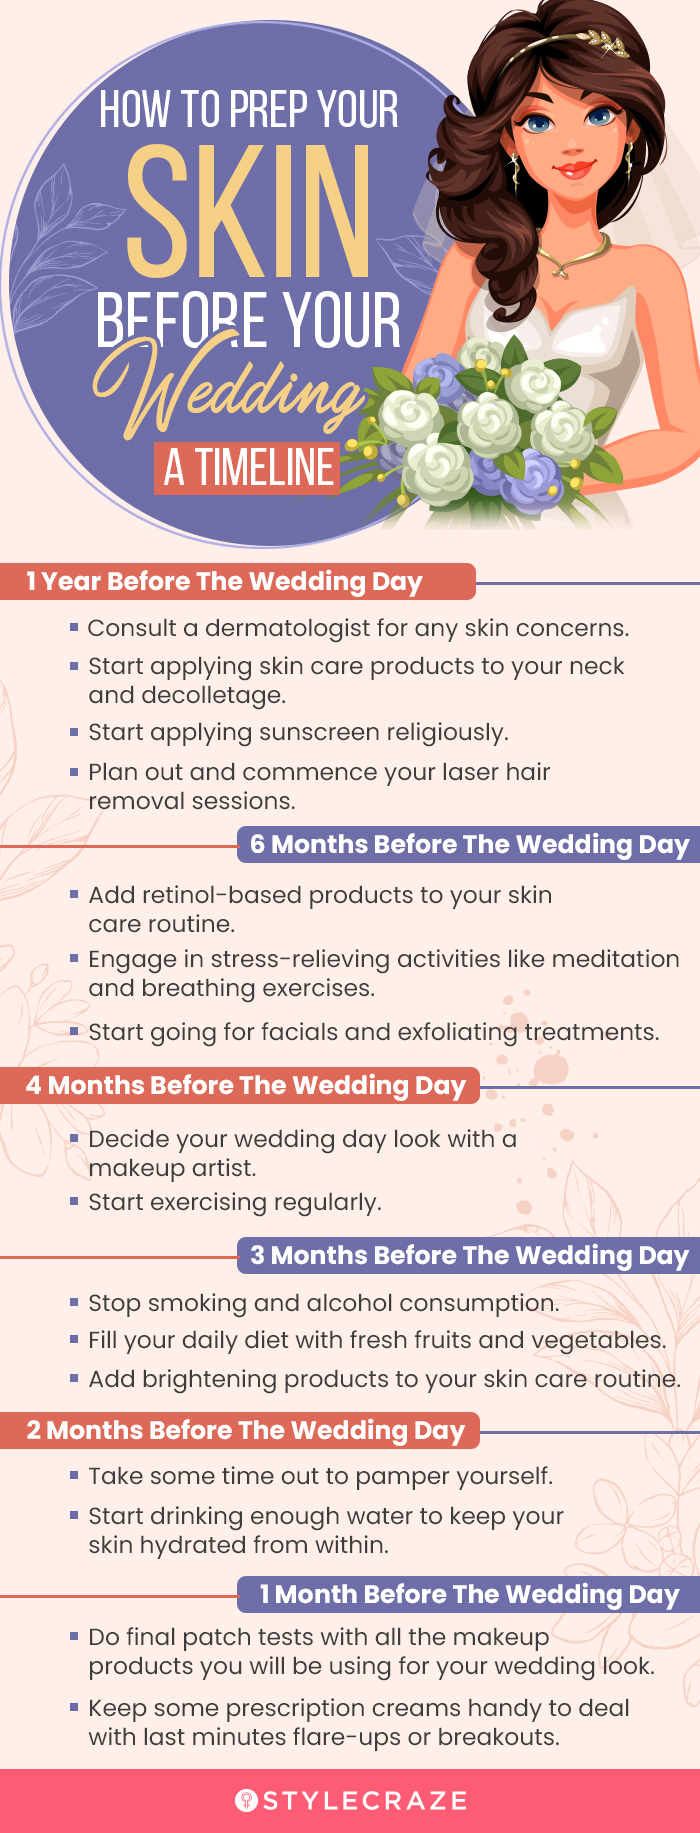 how to prep your skin before your wedding a timeline (infographic)